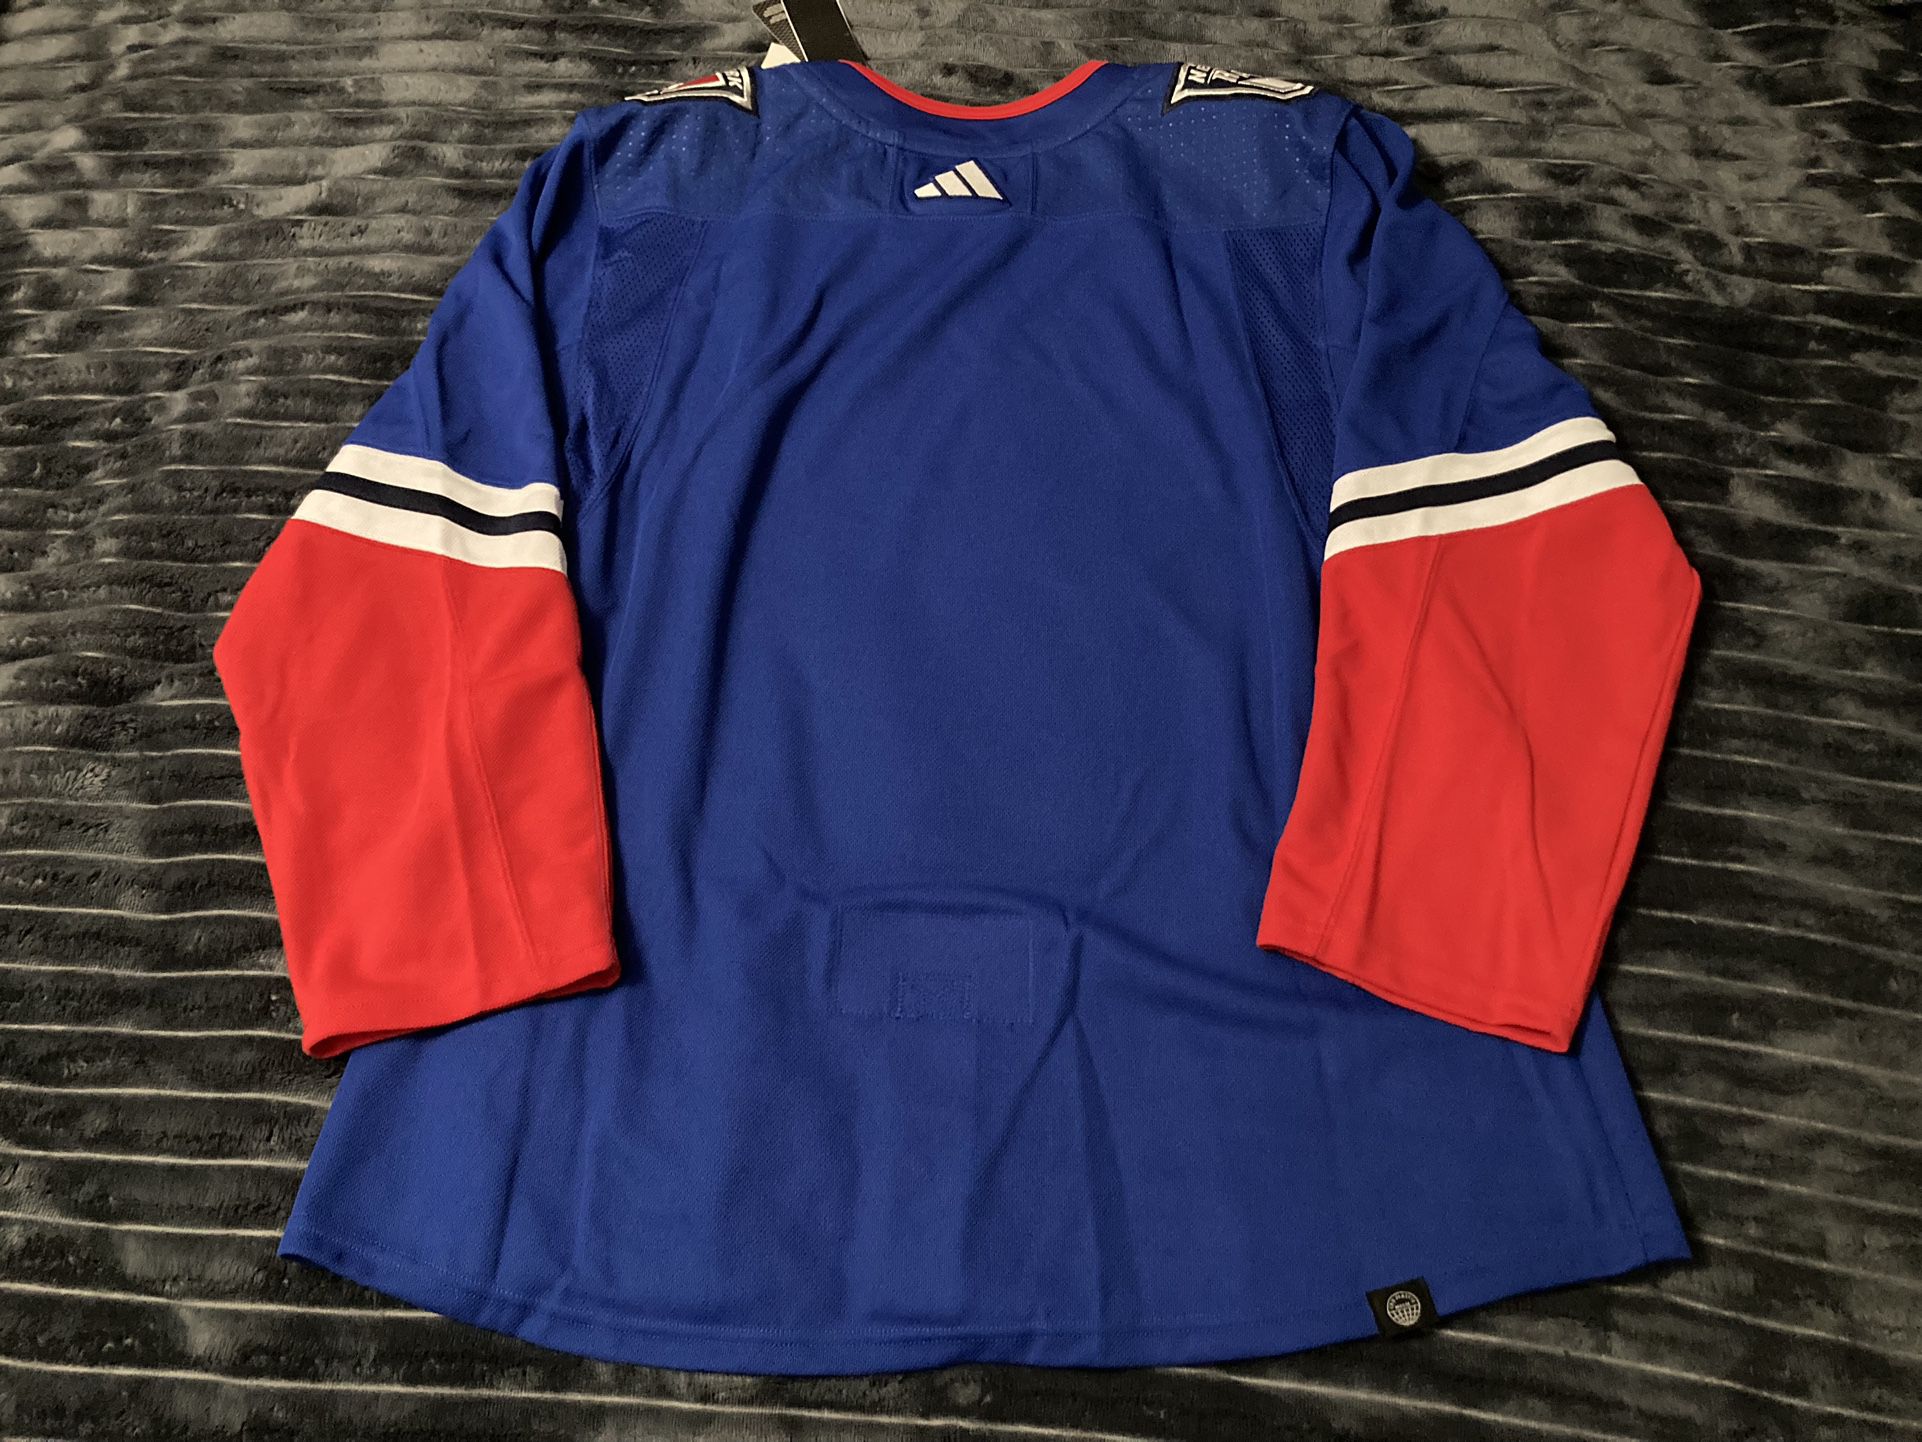 ny rangers vintage jersey Cheap Sell - OFF 54%